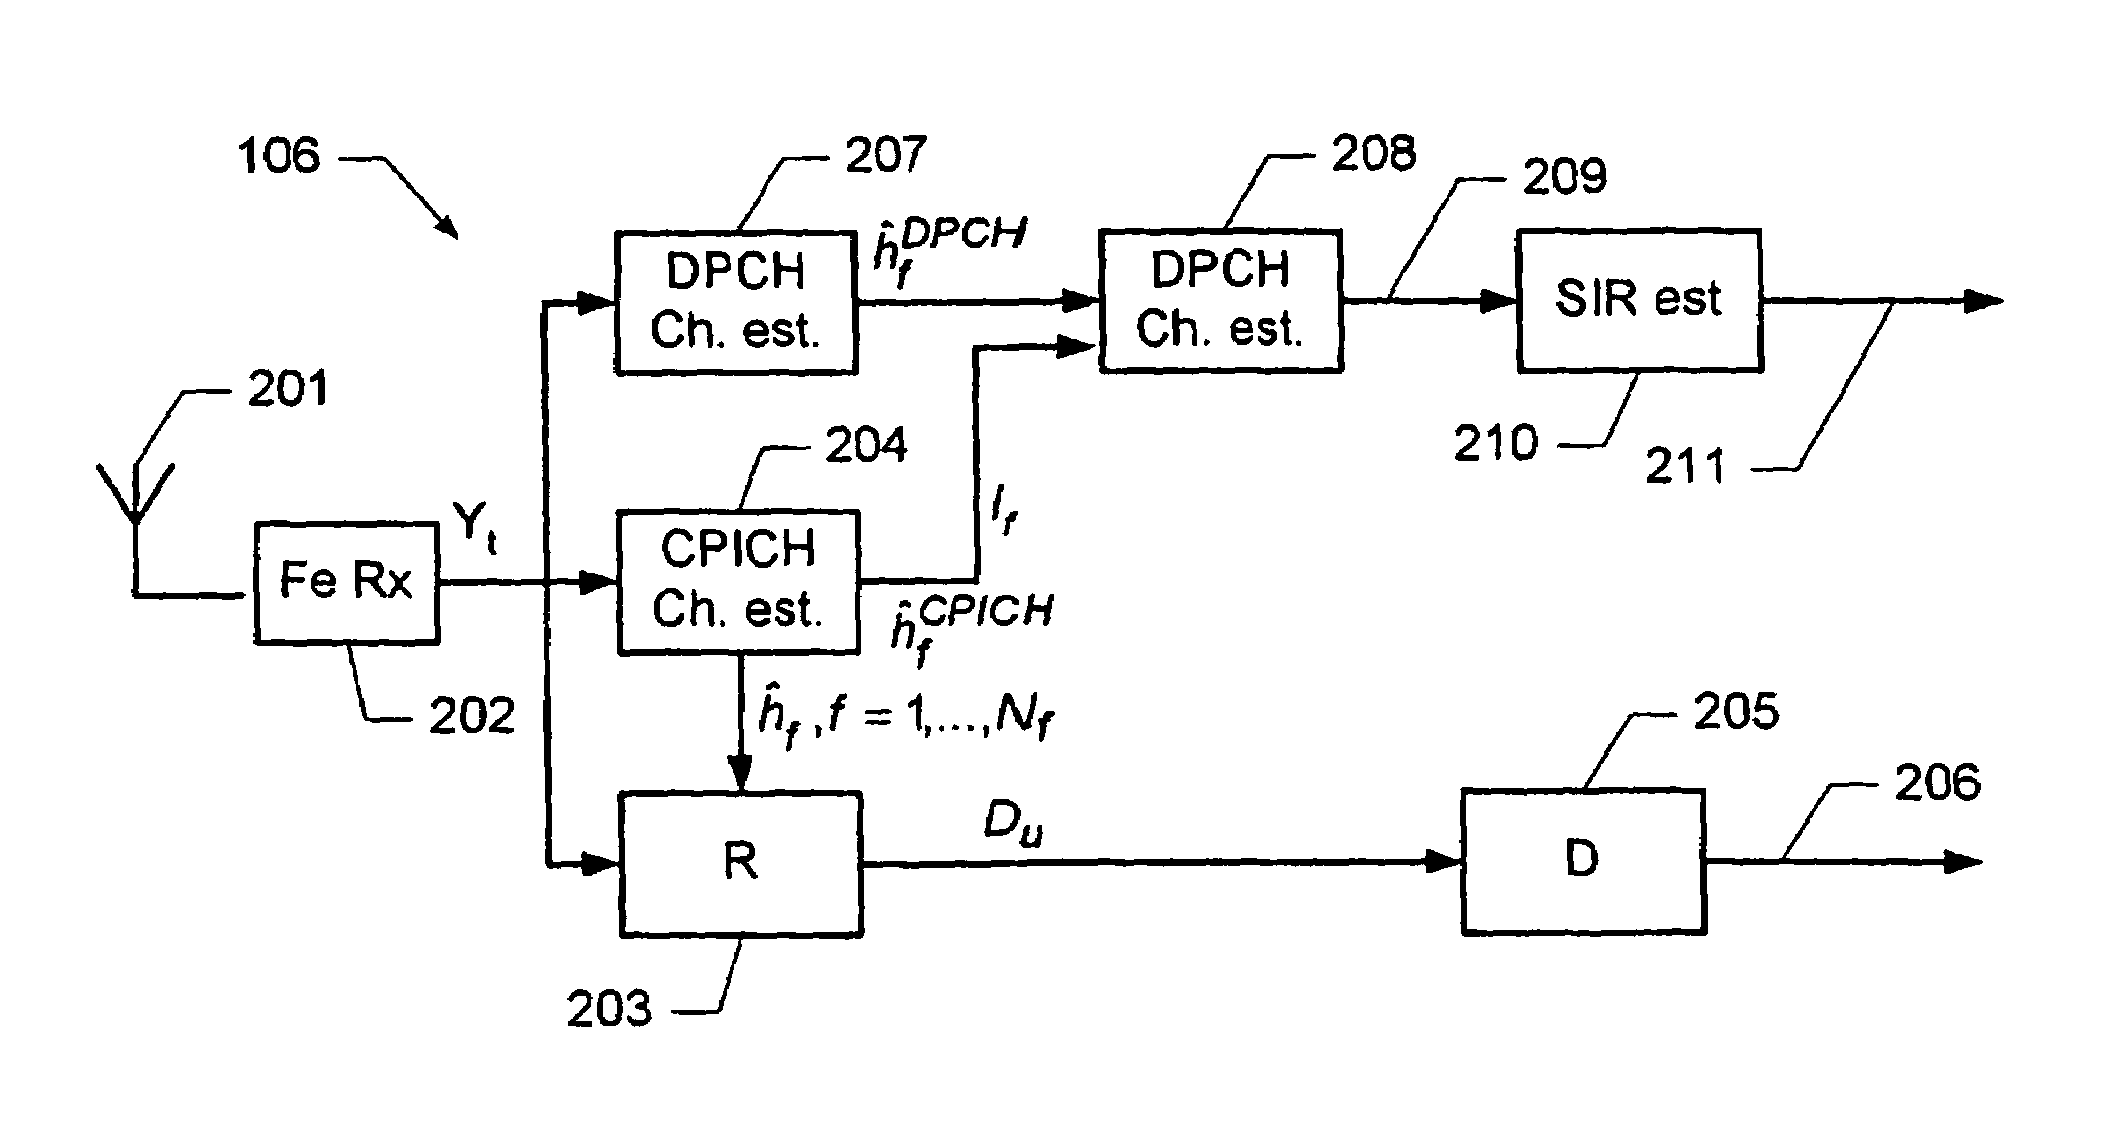 Determination of a channel estimate of a transmission channel